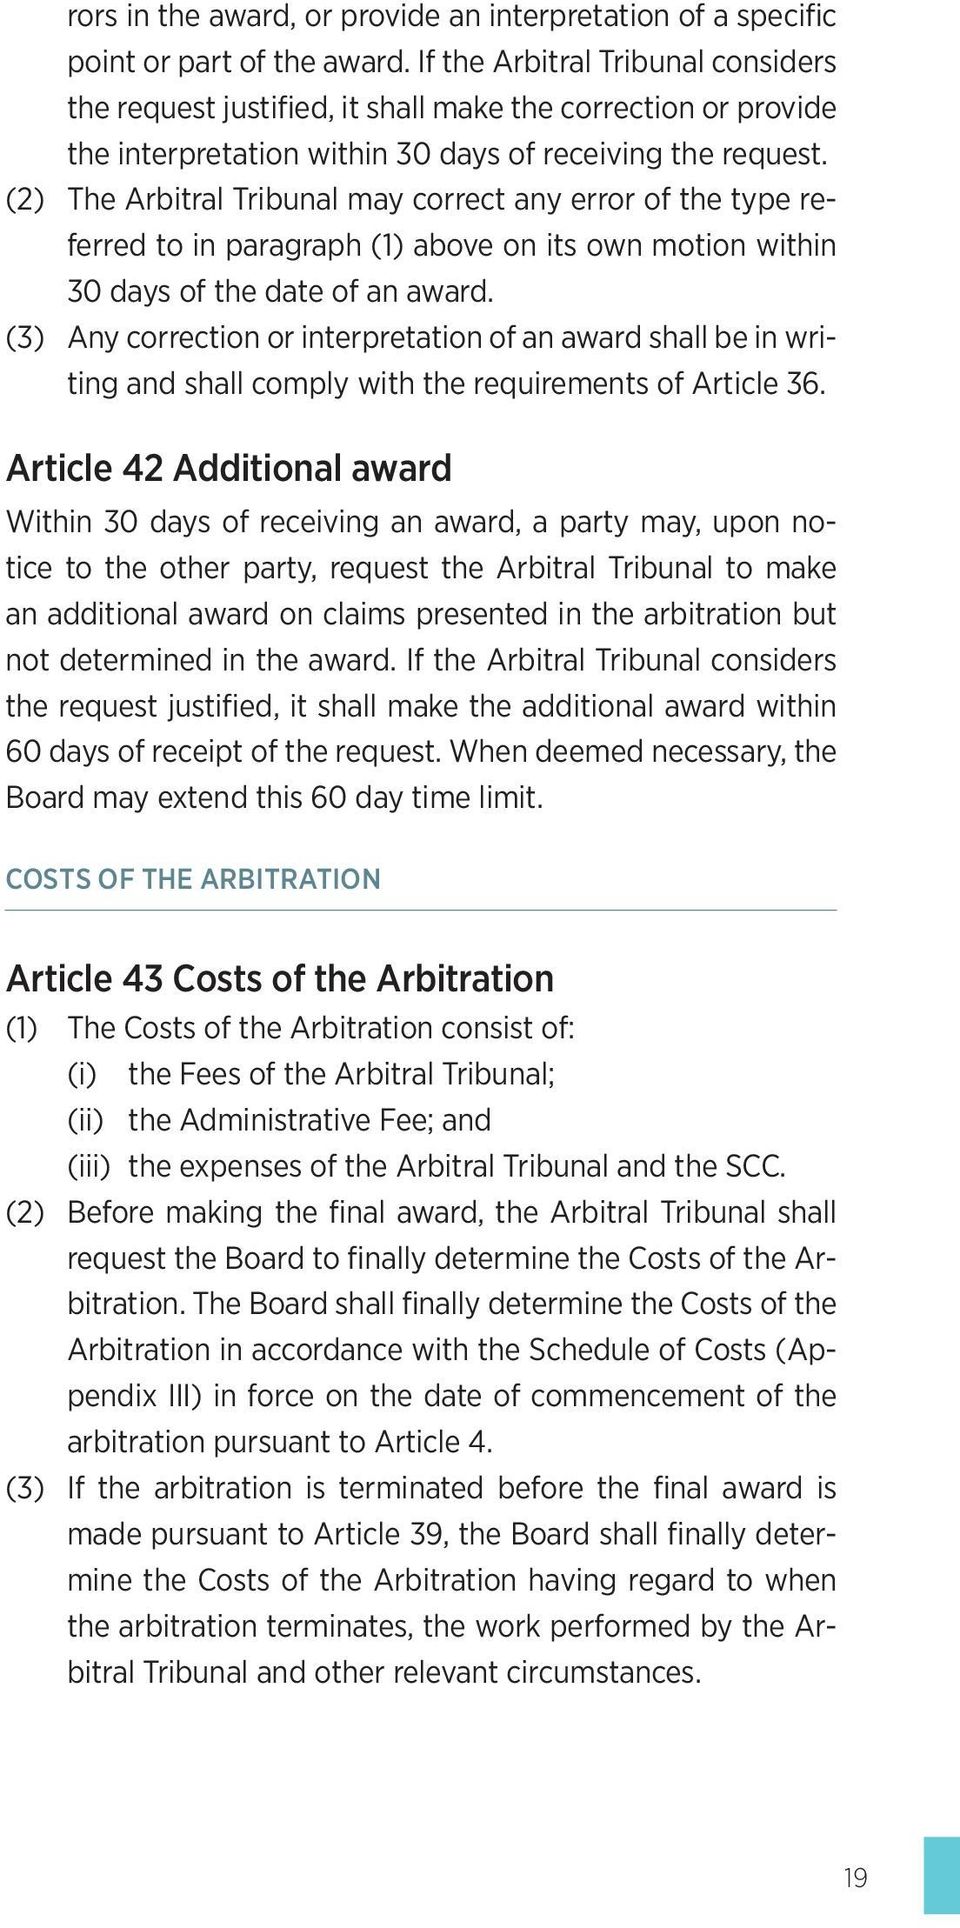 (2) The Arbitral Tribunal may correct any error of the type referred to in paragraph (1) above on its own motion within 30 days of the date of an award.